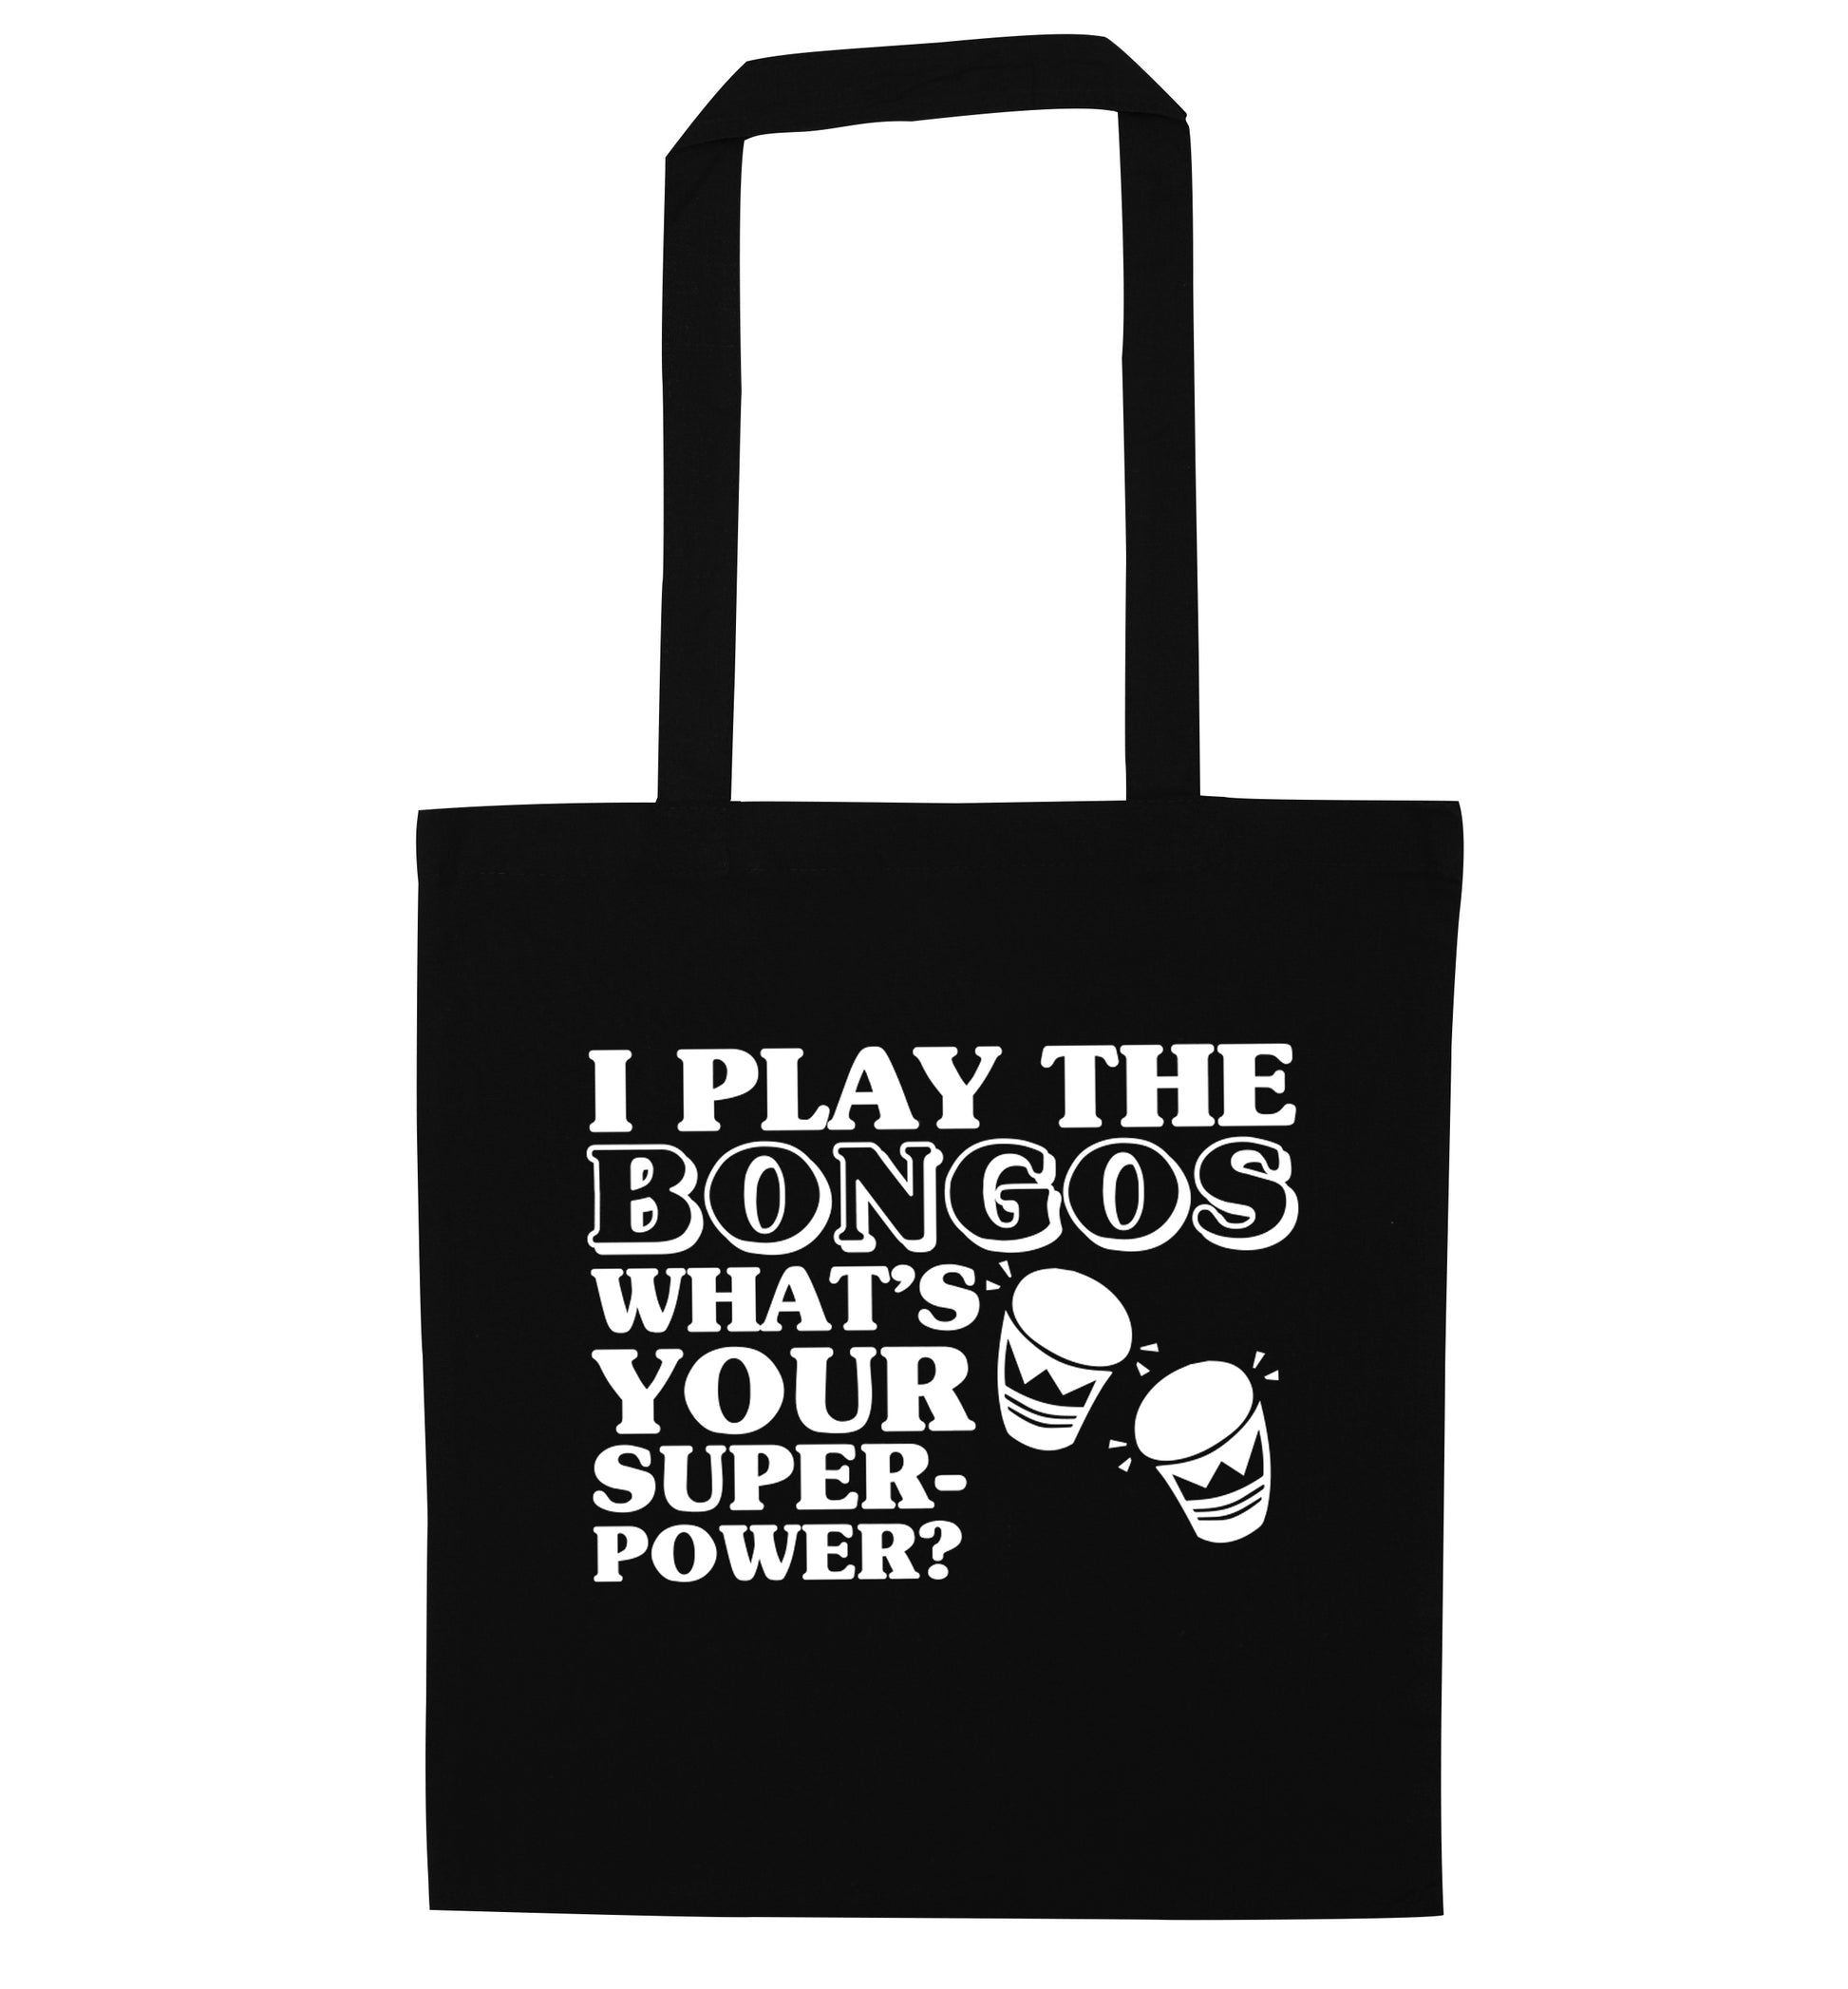 I play the bongos what's your superpower? black tote bag